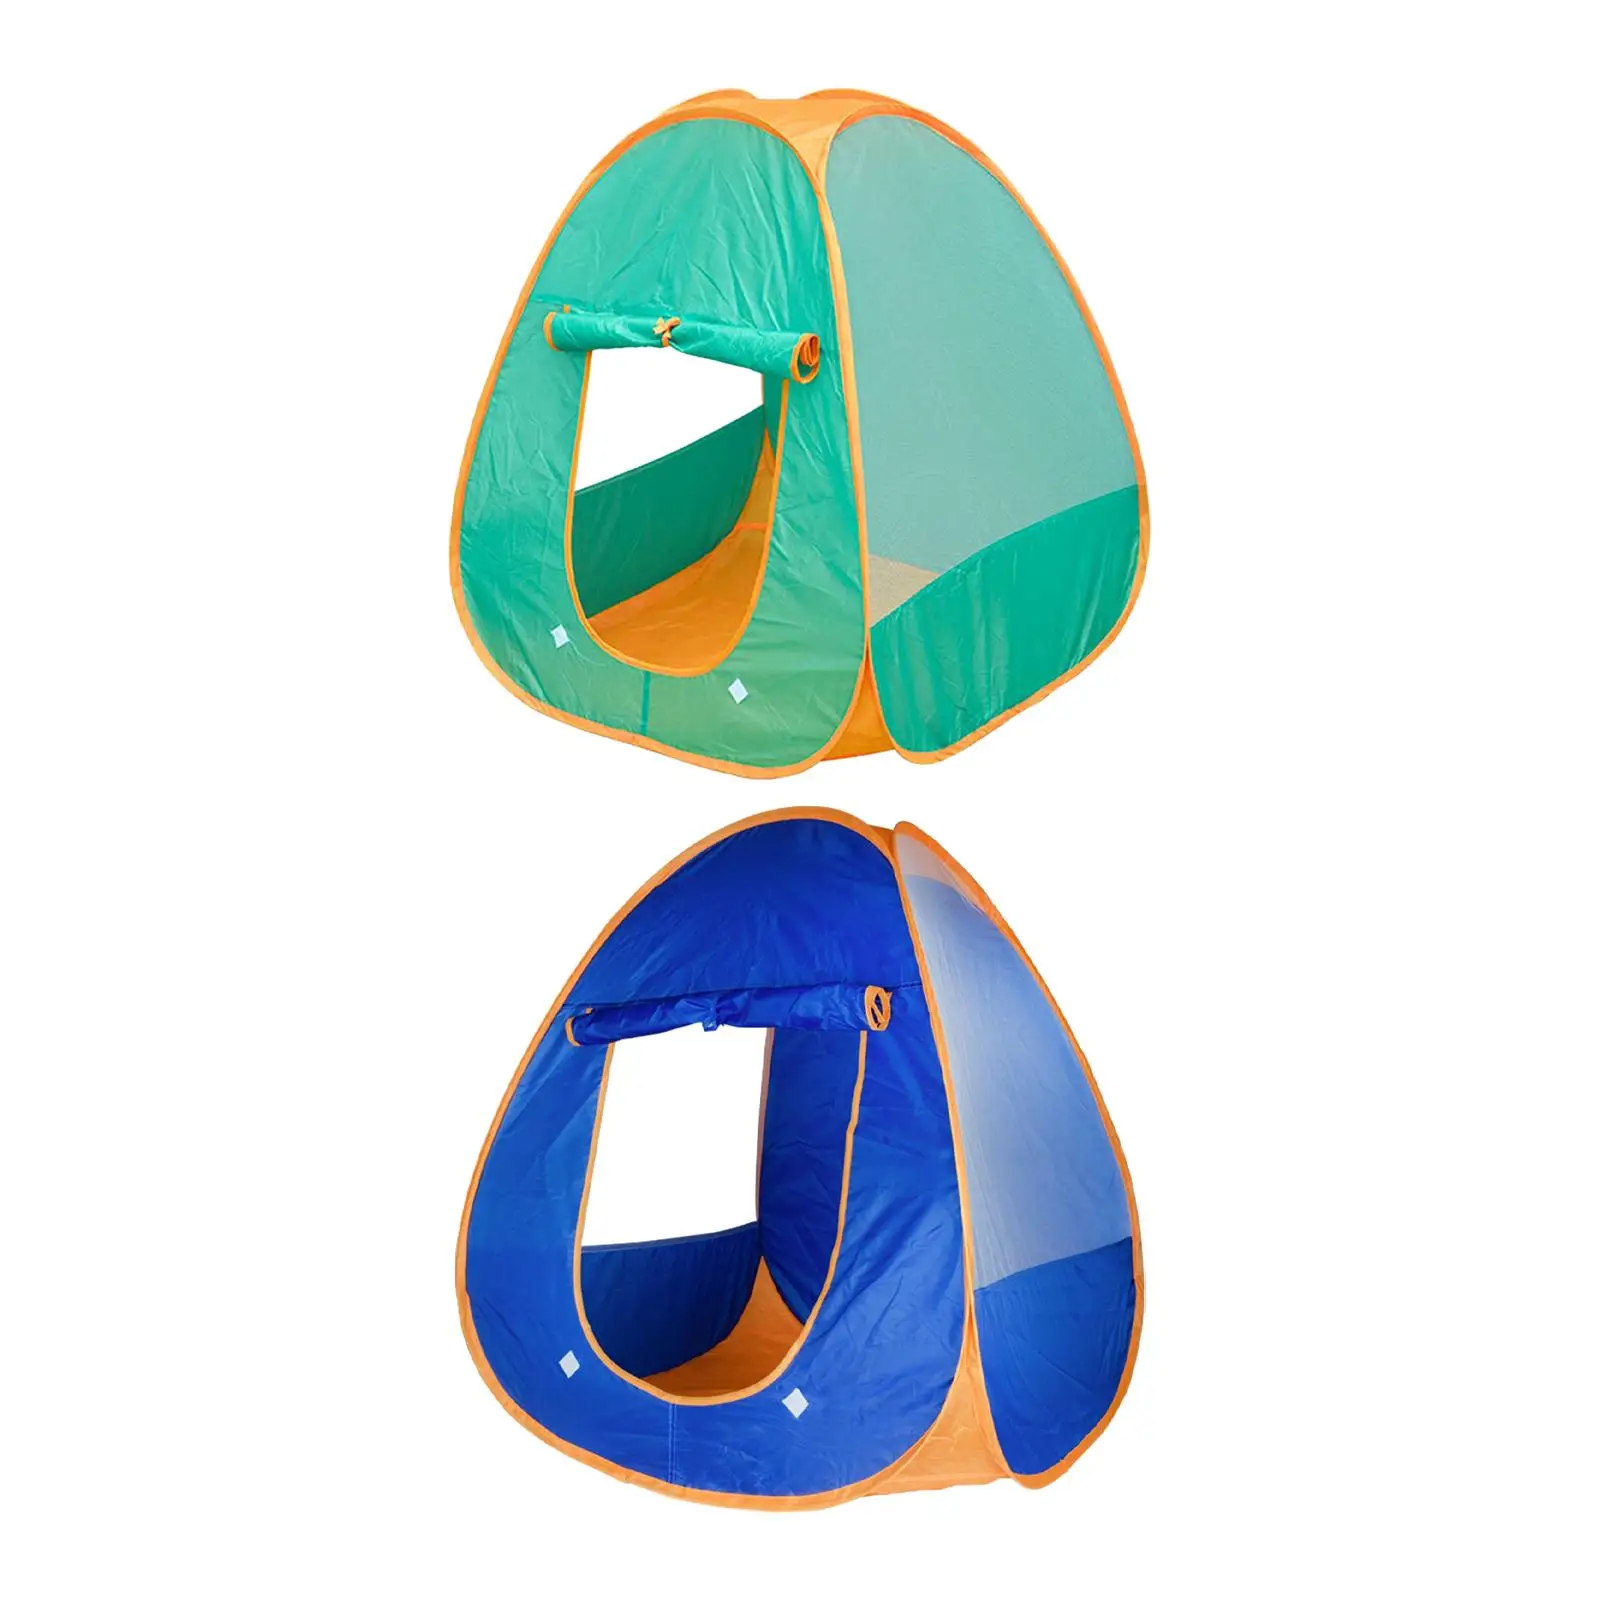 Children Play Tent Collapsible Role Play Toy for Nursery Room Indoor Outdoor